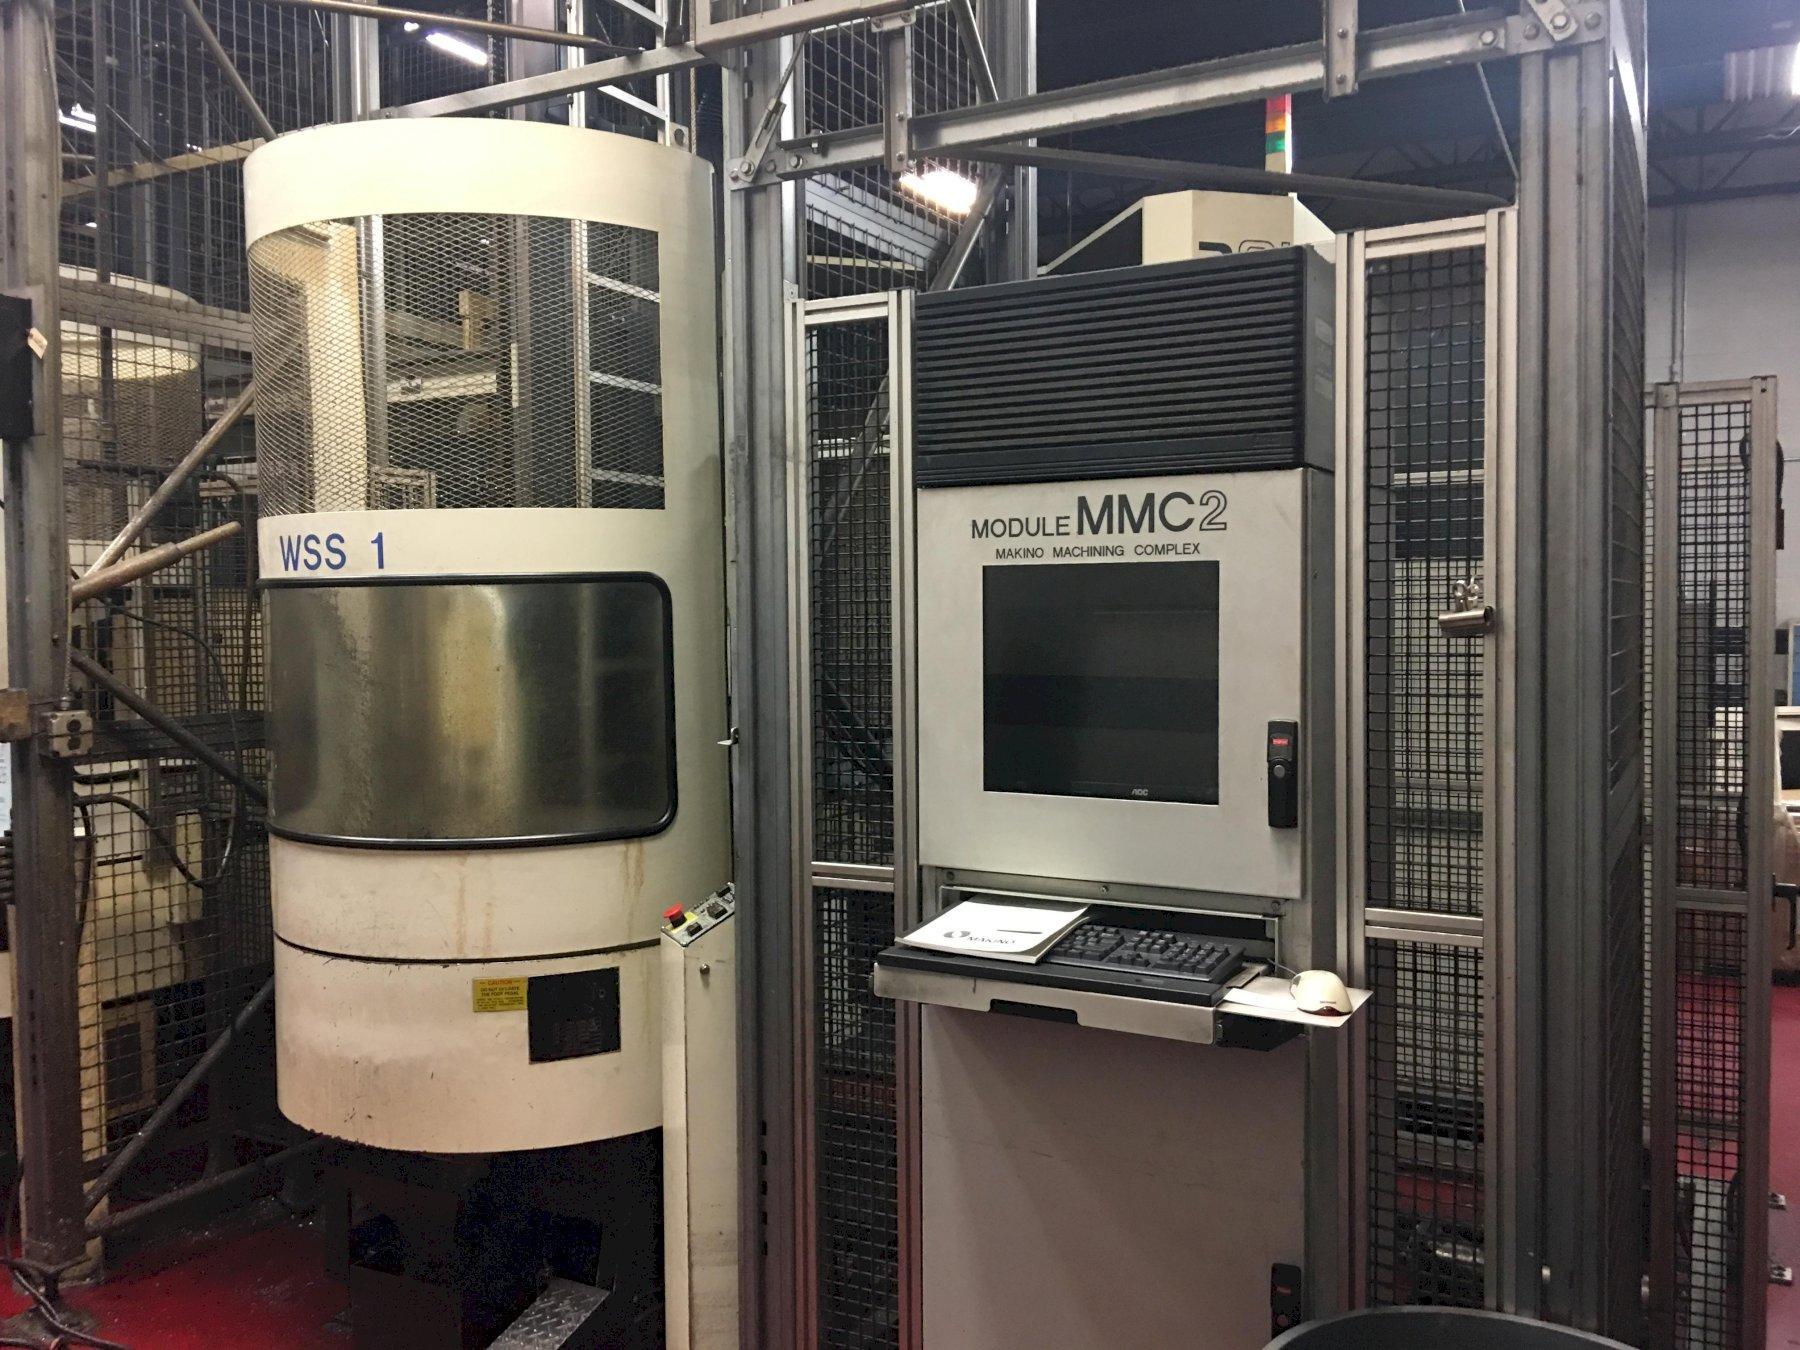 Makino Machining Cell - 14 Station Modular Pallet System w/(2) Work Setting Stations